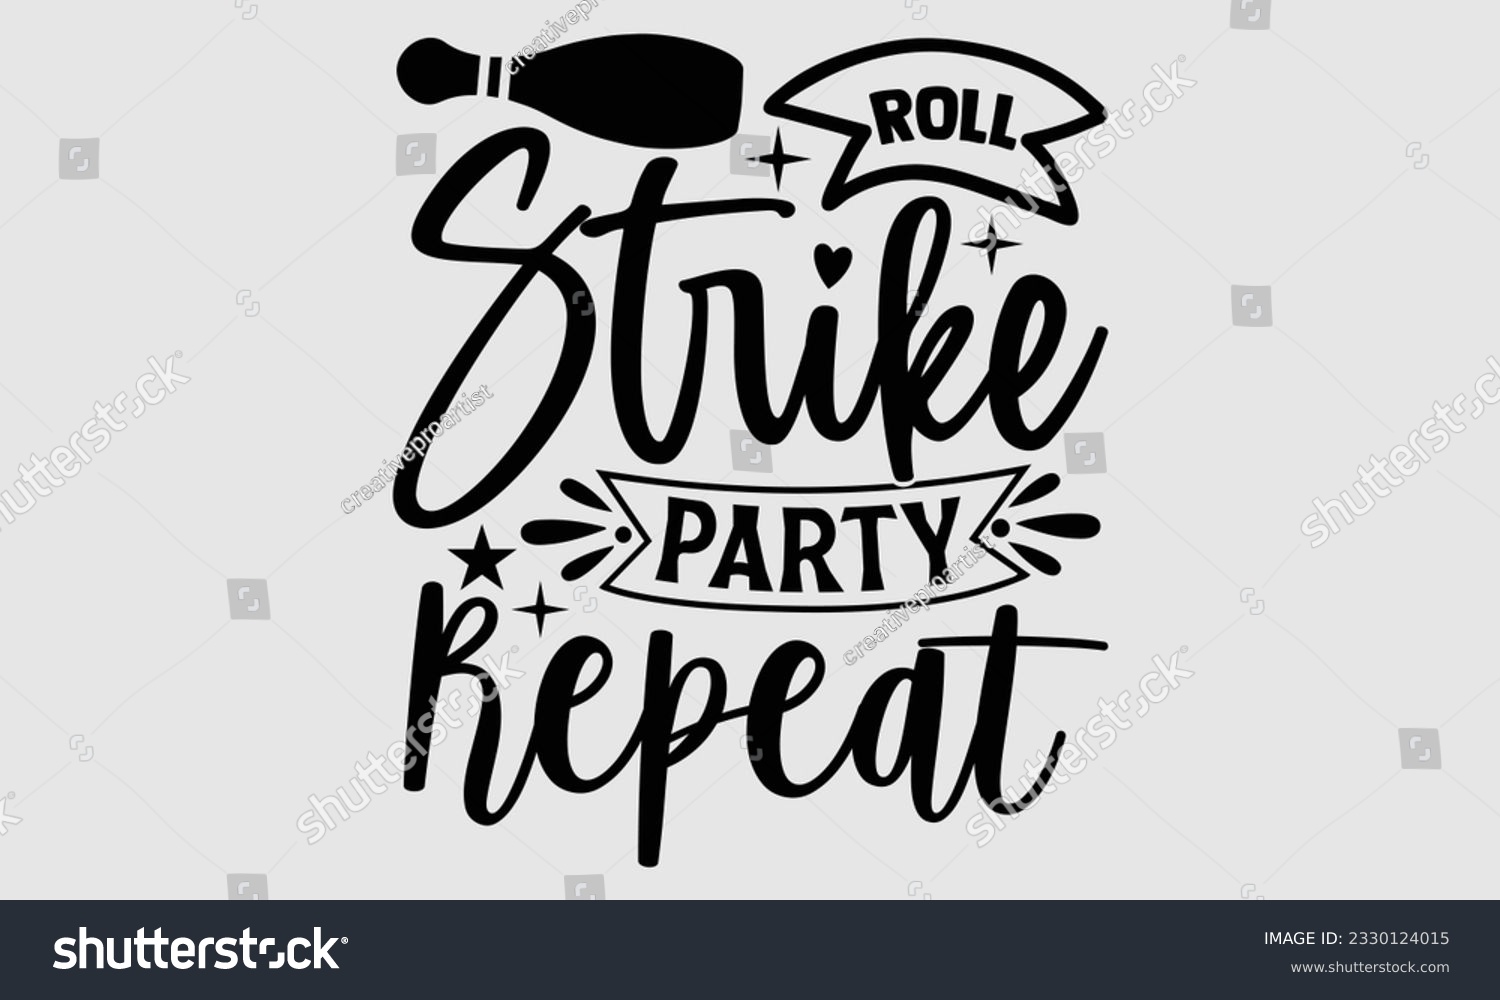 SVG of Roll Strike Party Repeat- Bowling t-shirt design, Illustration for prints on SVG and bags, posters, cards, greeting card template with typography text EPS svg